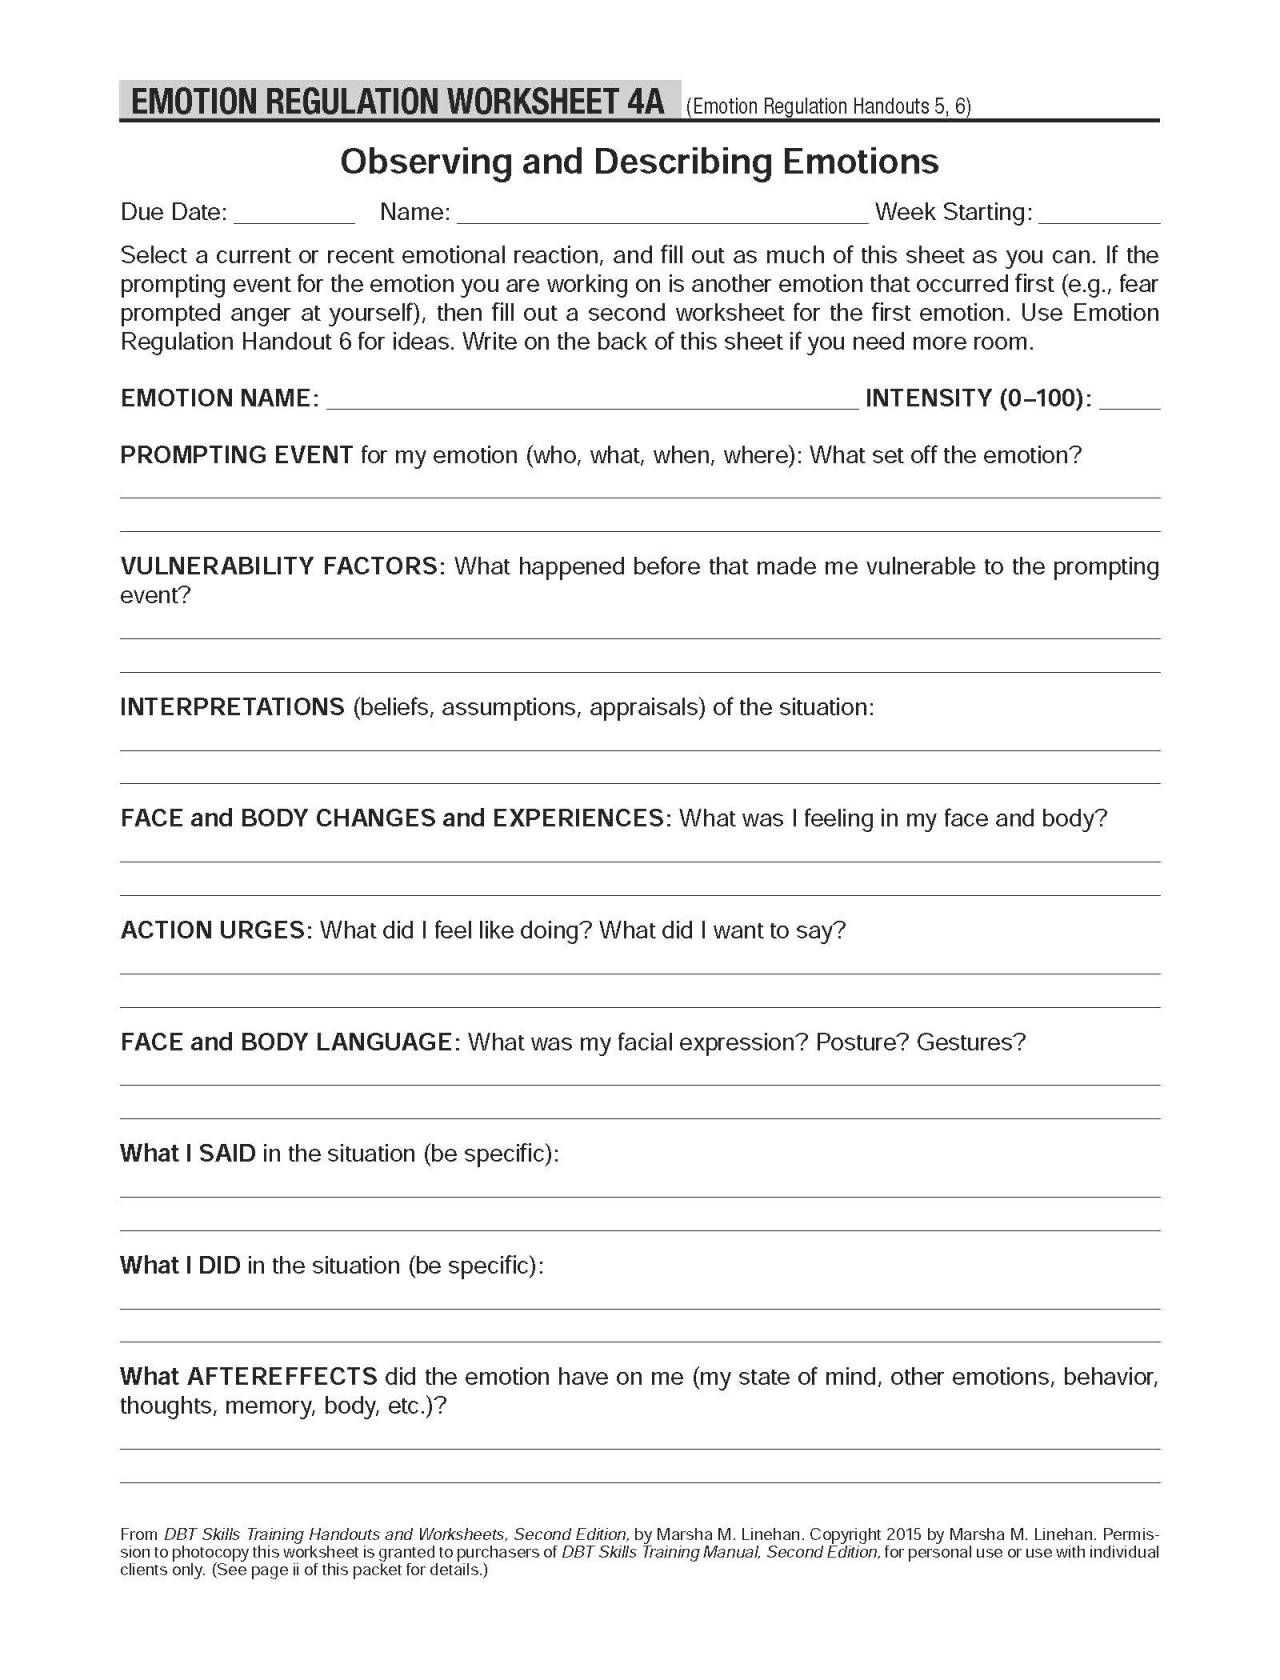 Core Belief Worksheet Beck with therapy Worksheet Counseling tools Pinterest